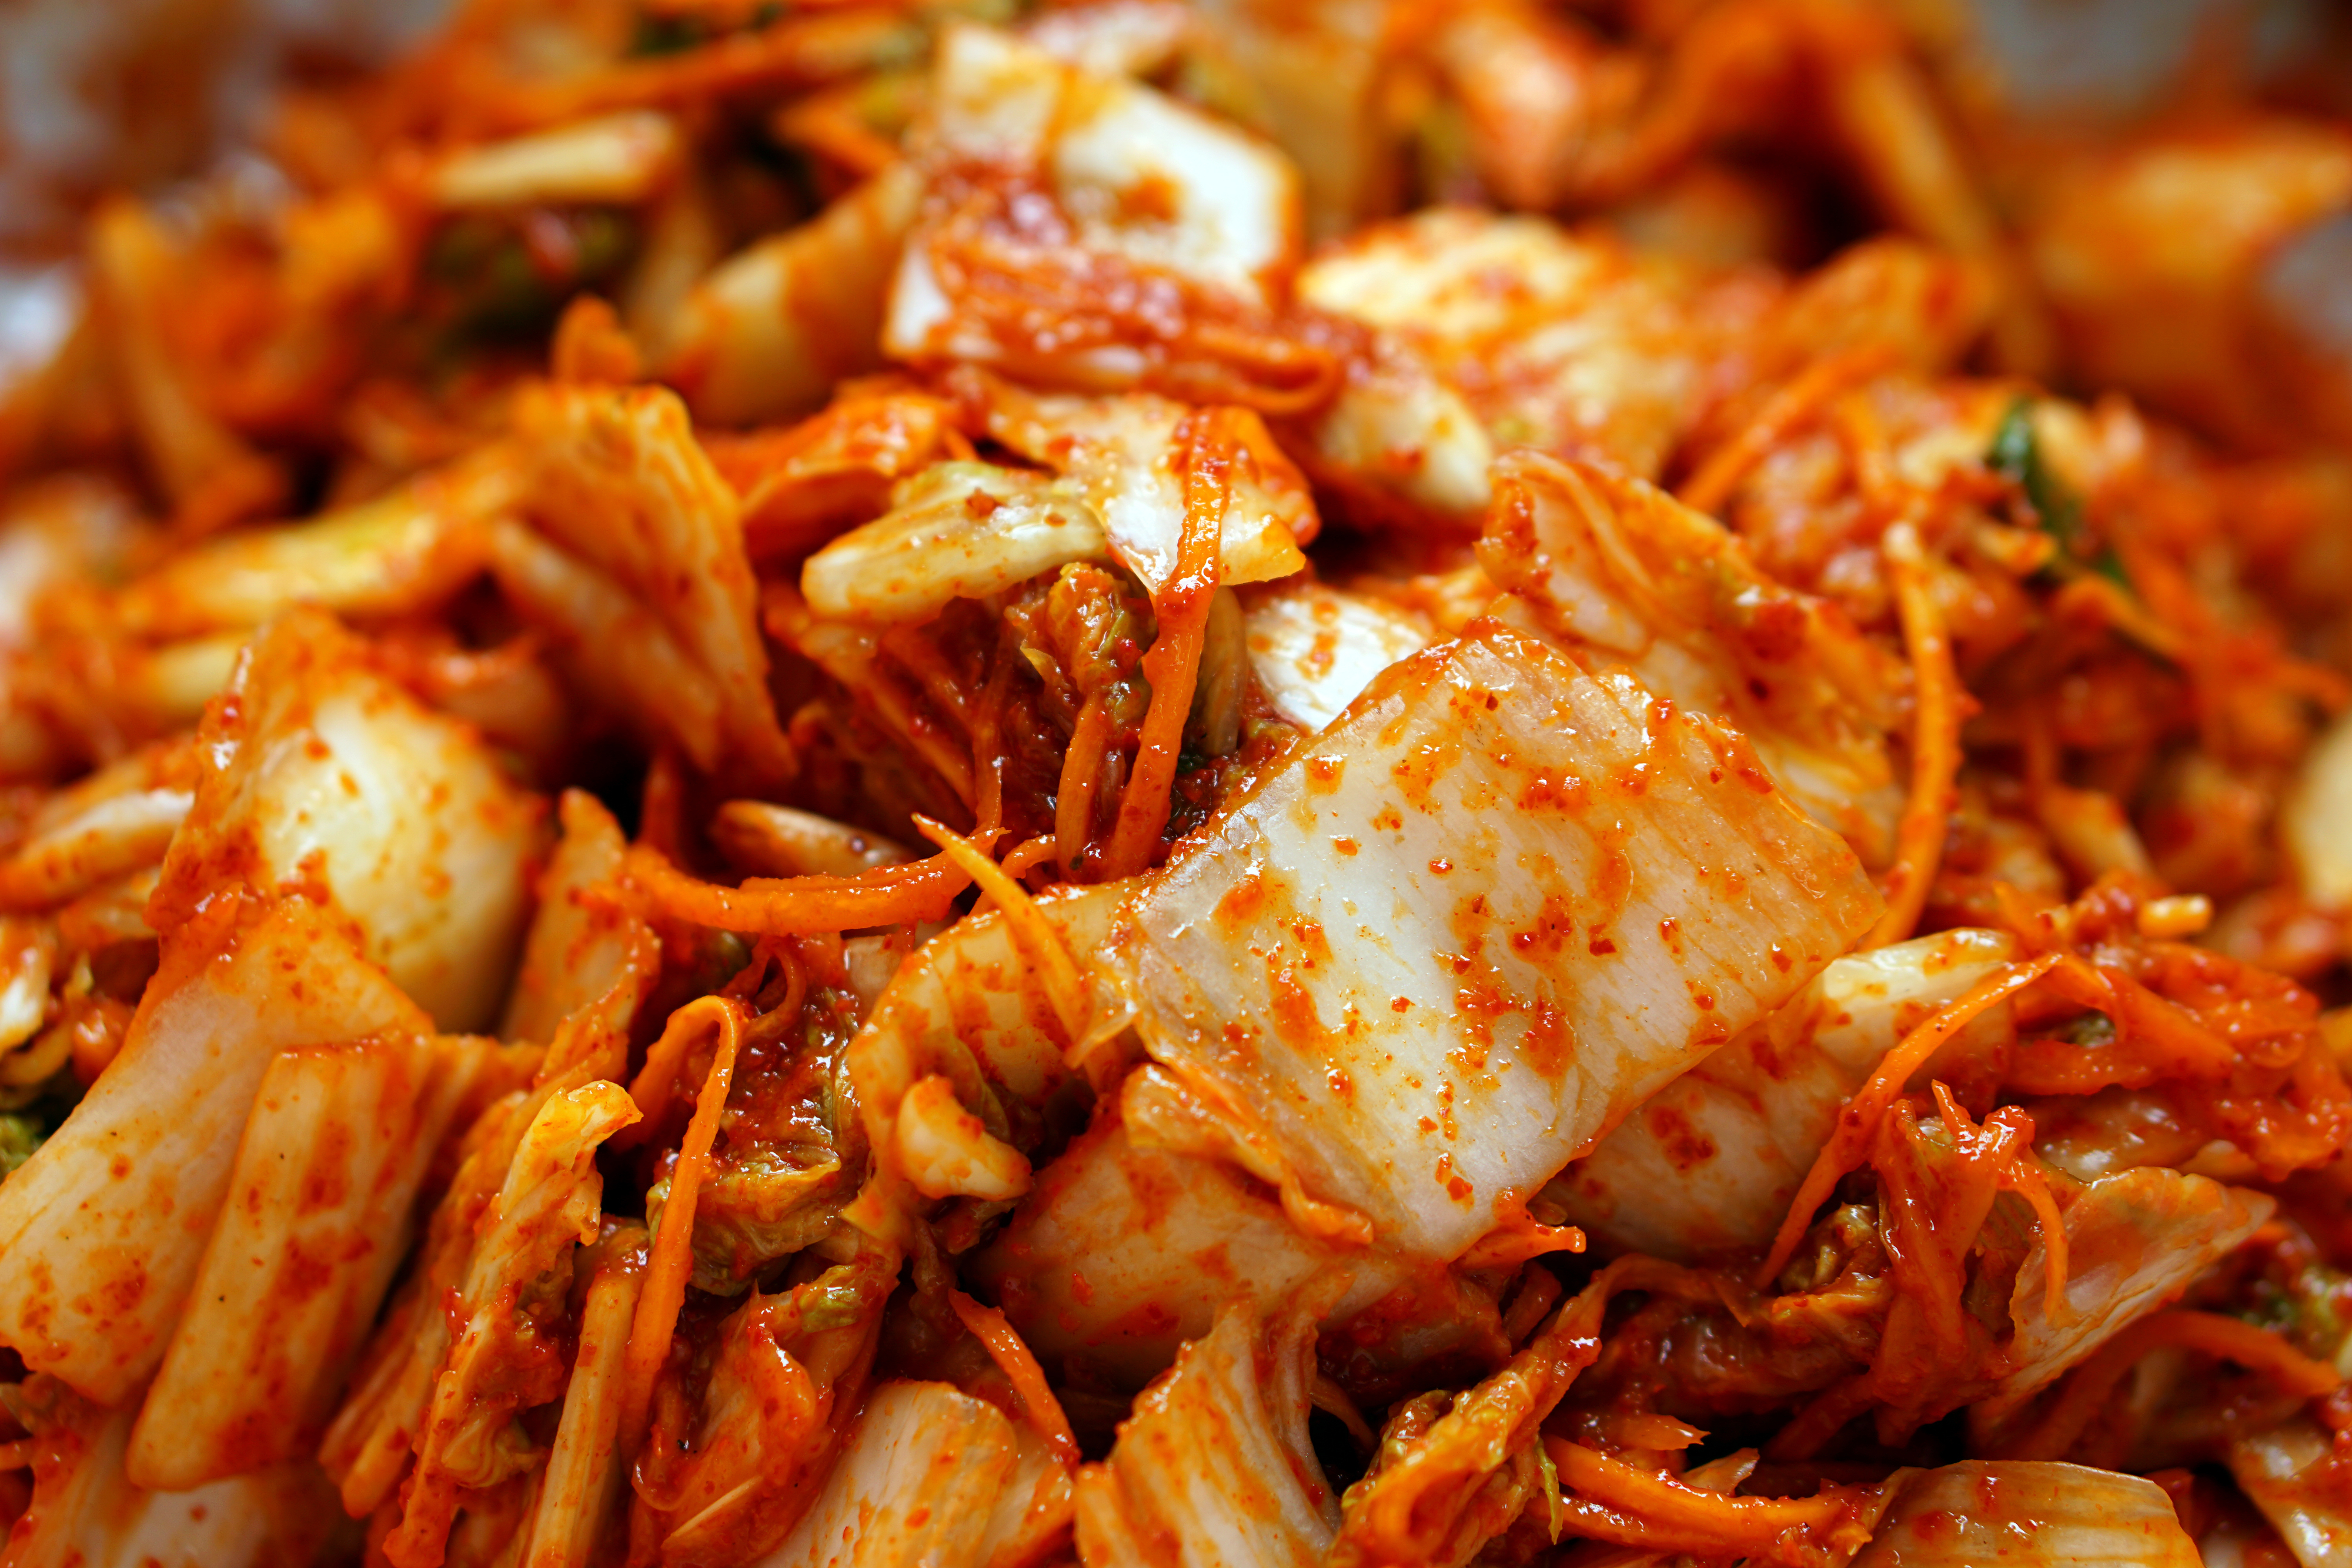 Close-up of freshly made kimchi, showcasing its ingredients and texture